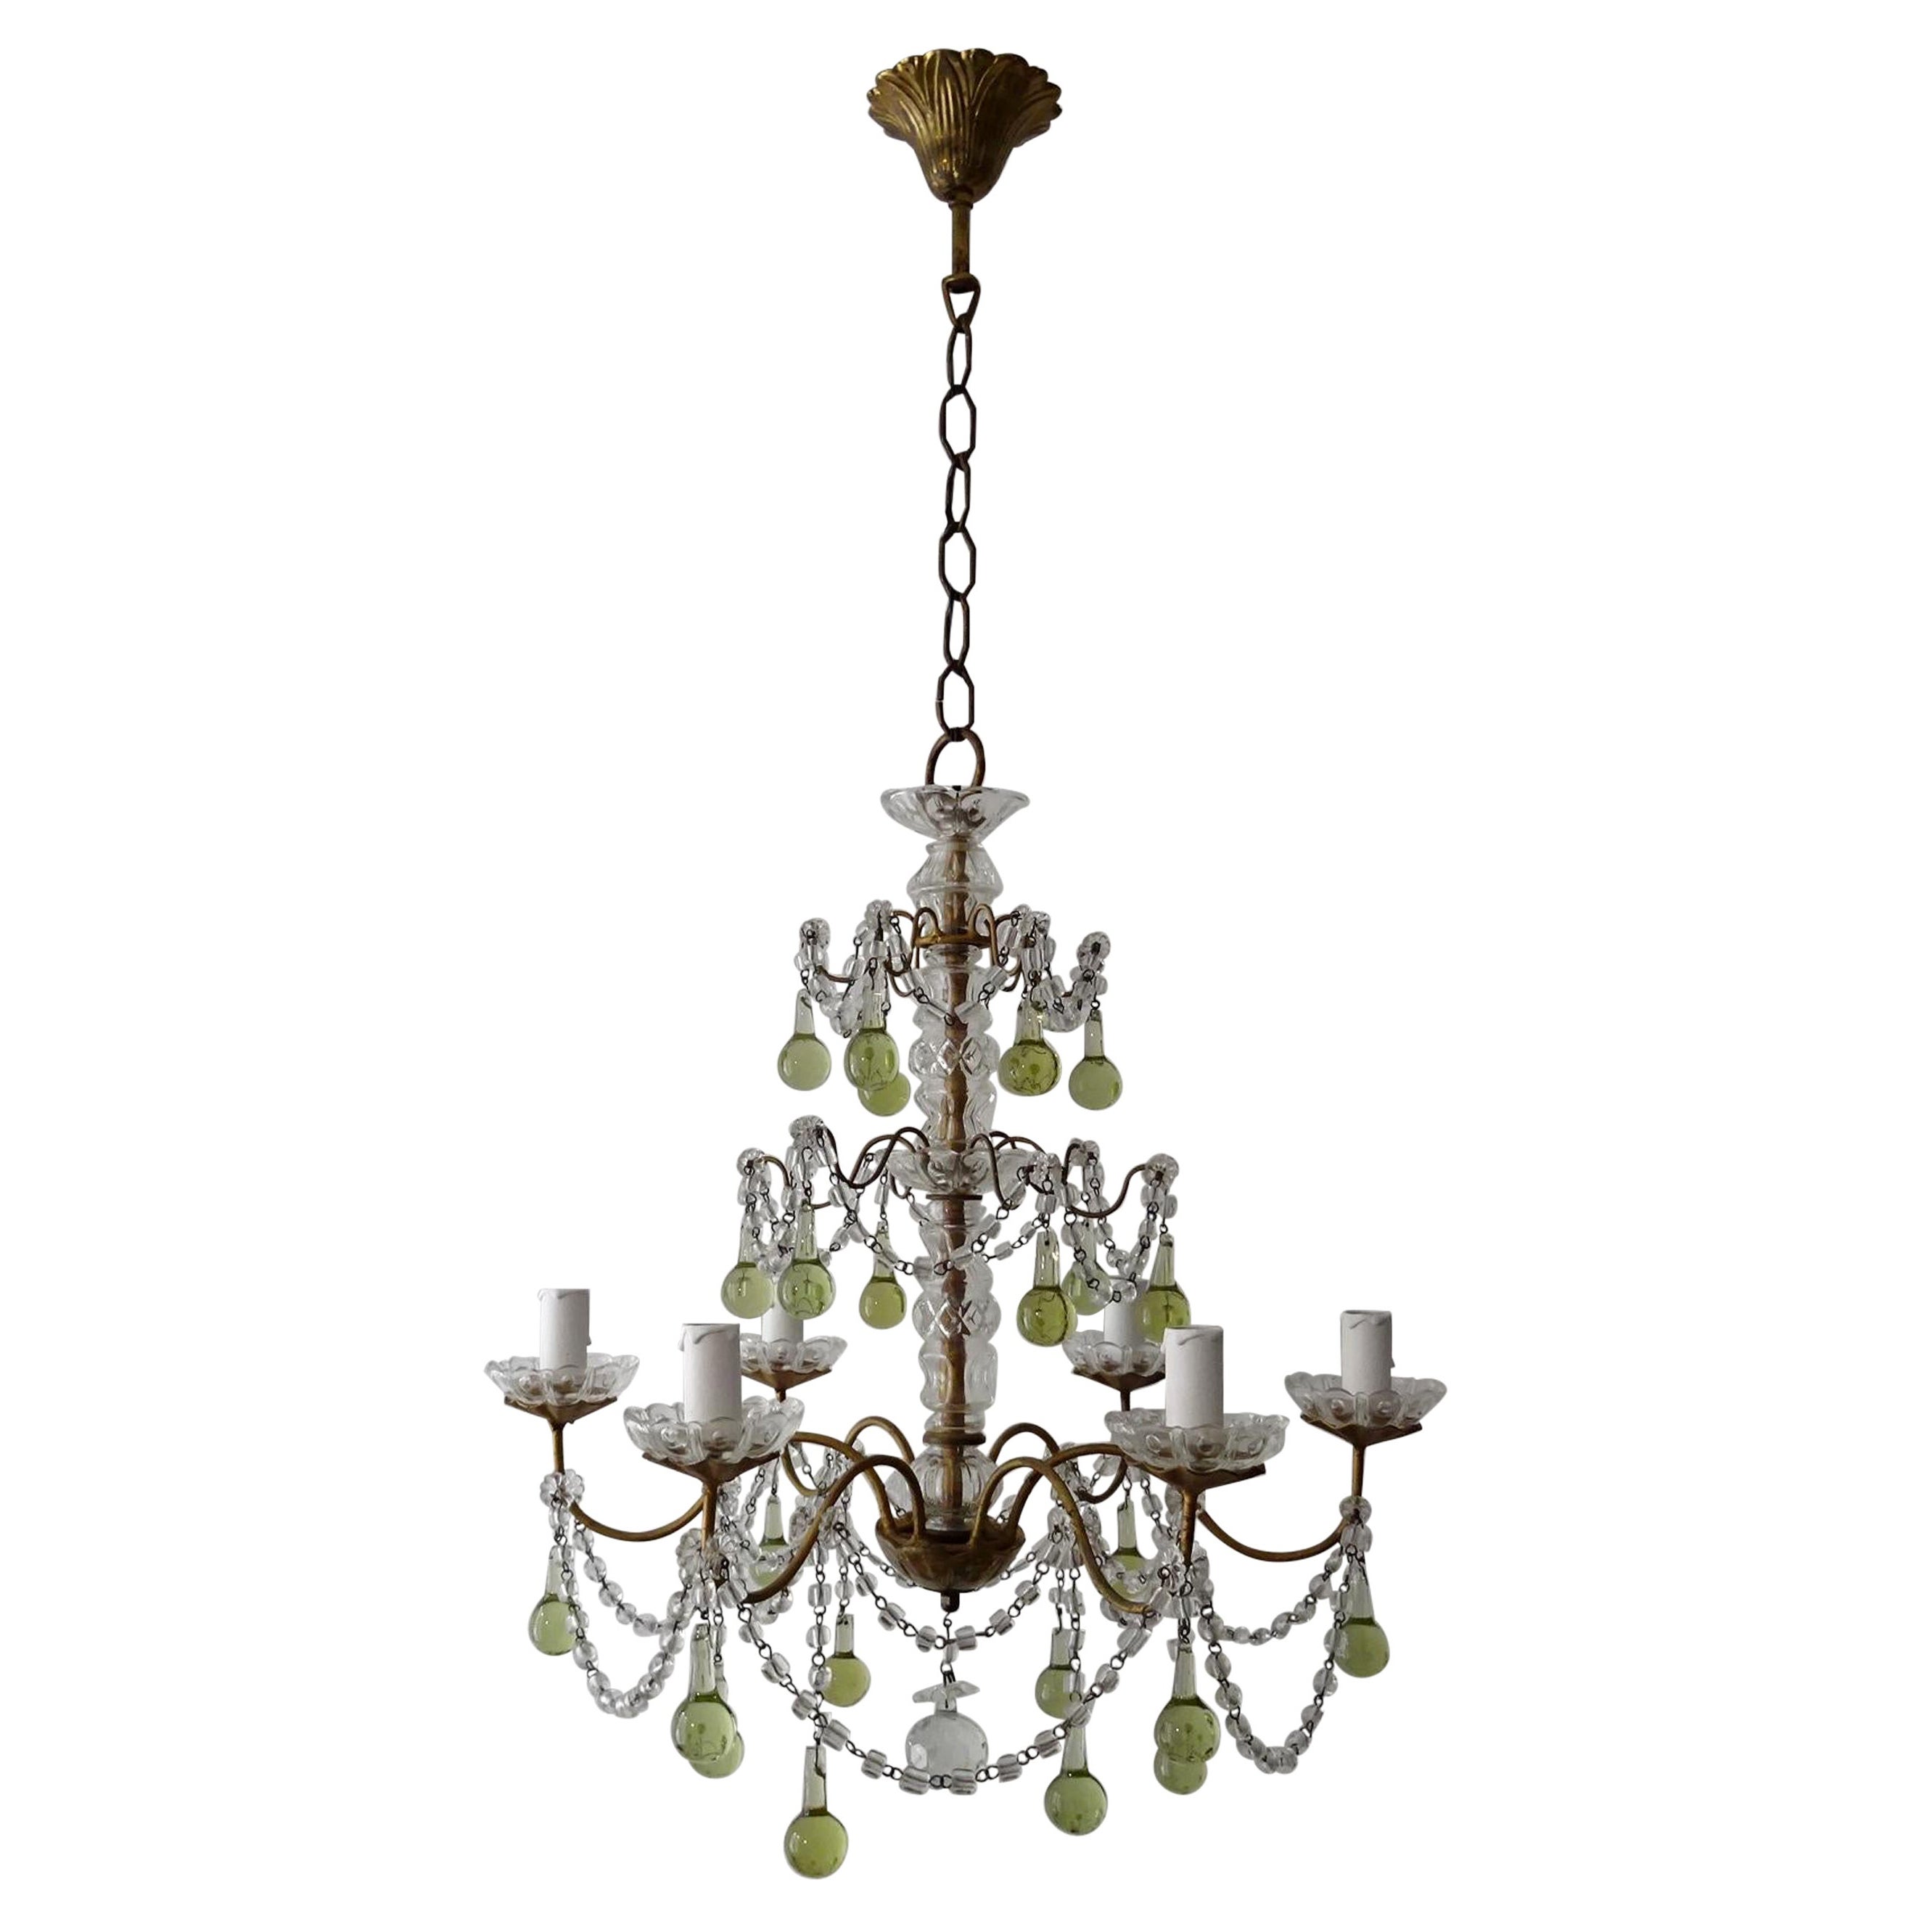 French Rare Green Chartreuse Murano Glass Drops Crystal Chandelier, circa 1920